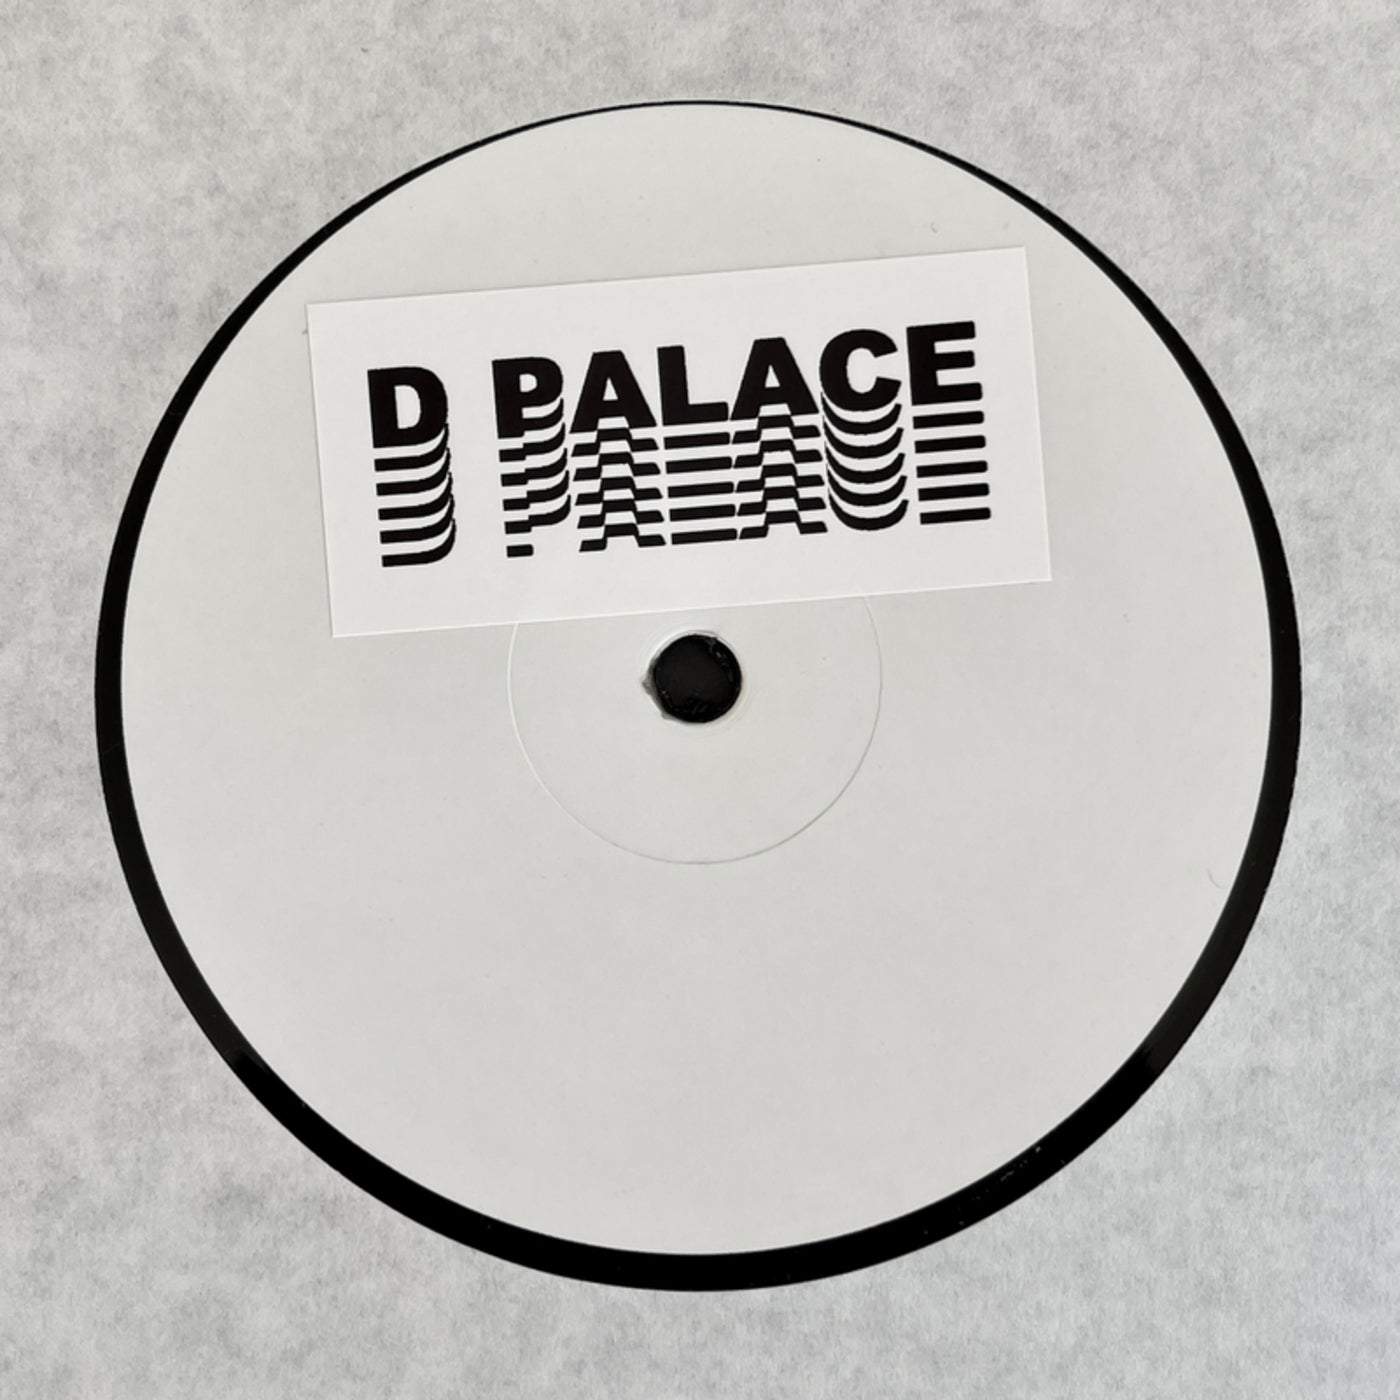 Download D Palace - DPAL002 on Electrobuzz